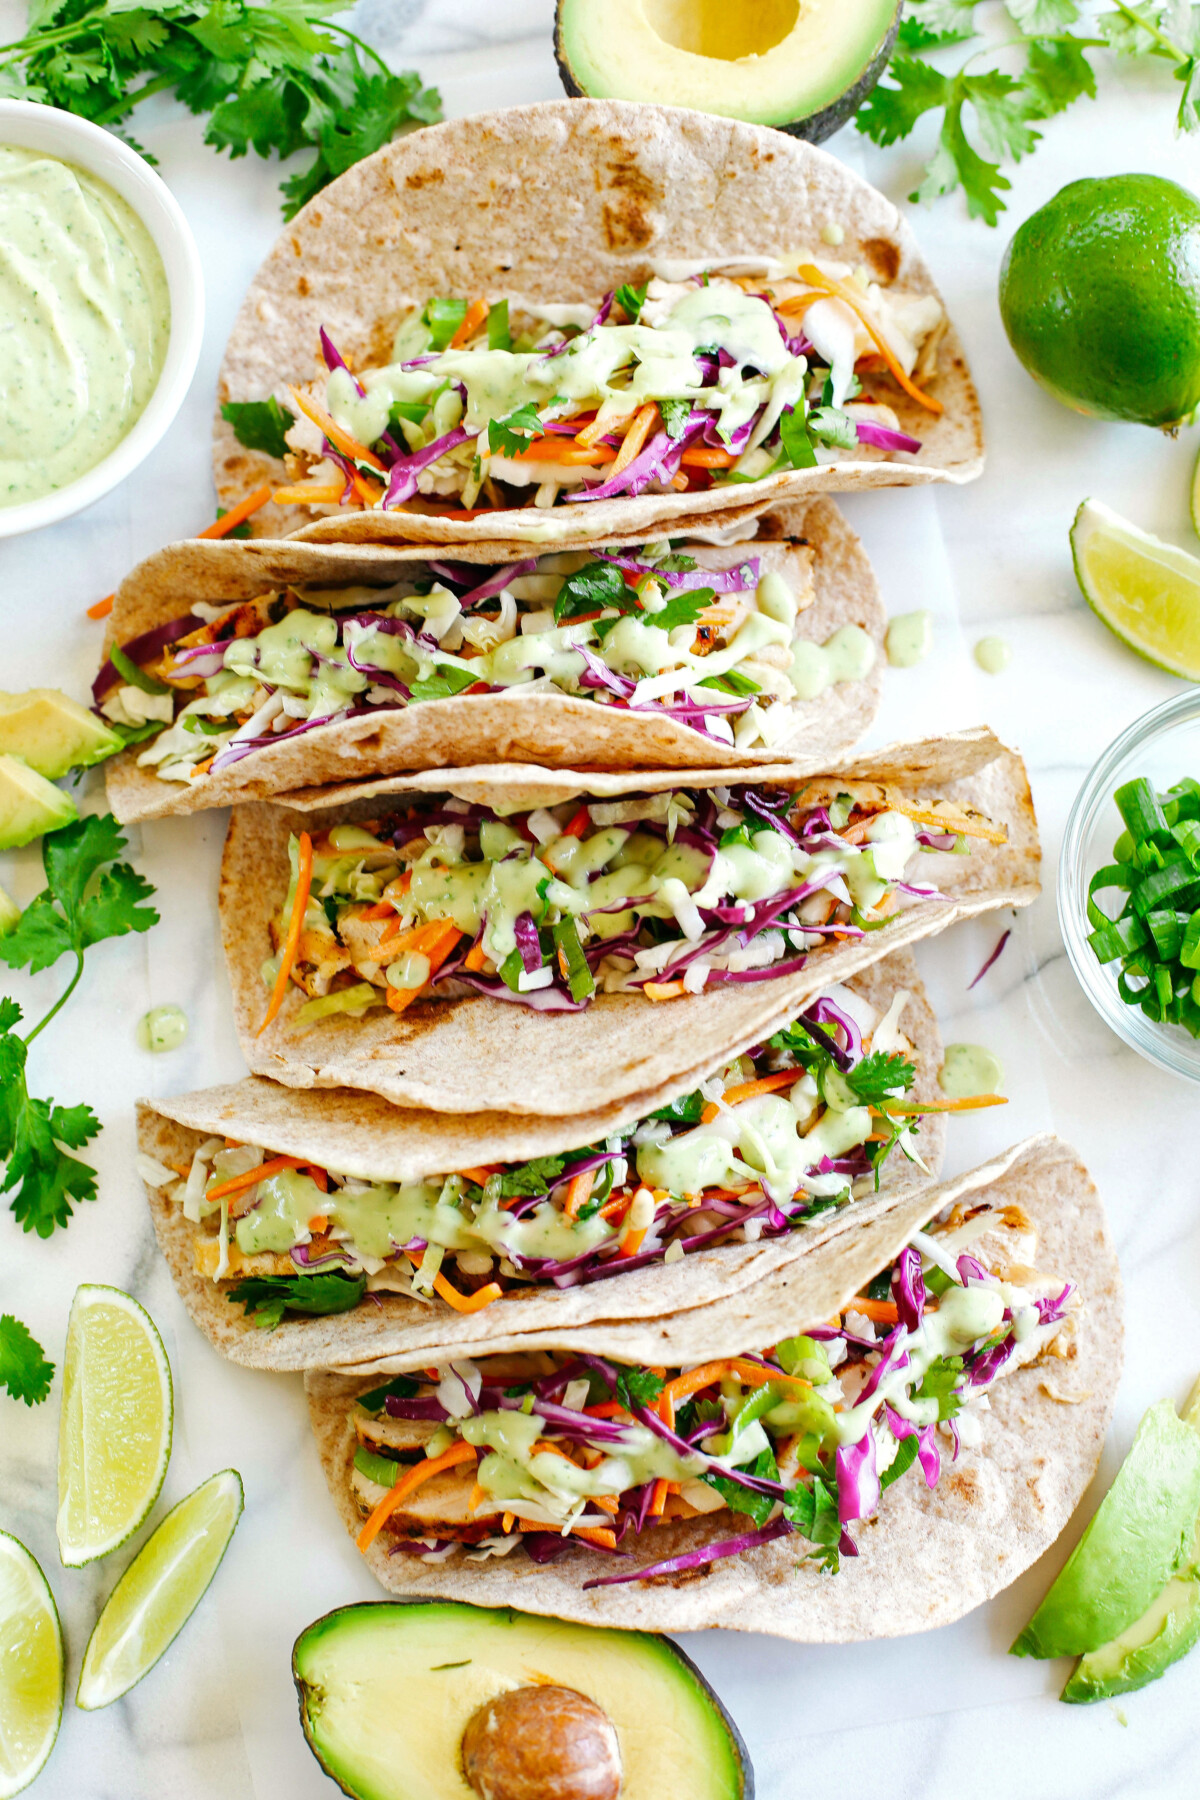 Easy and delicious Cilantro Lime Chicken Tacos topped with tangy coleslaw and homemade avocado crema make the perfect EASY summer recipe!  Full of fresh flavors and healthy ingredients!